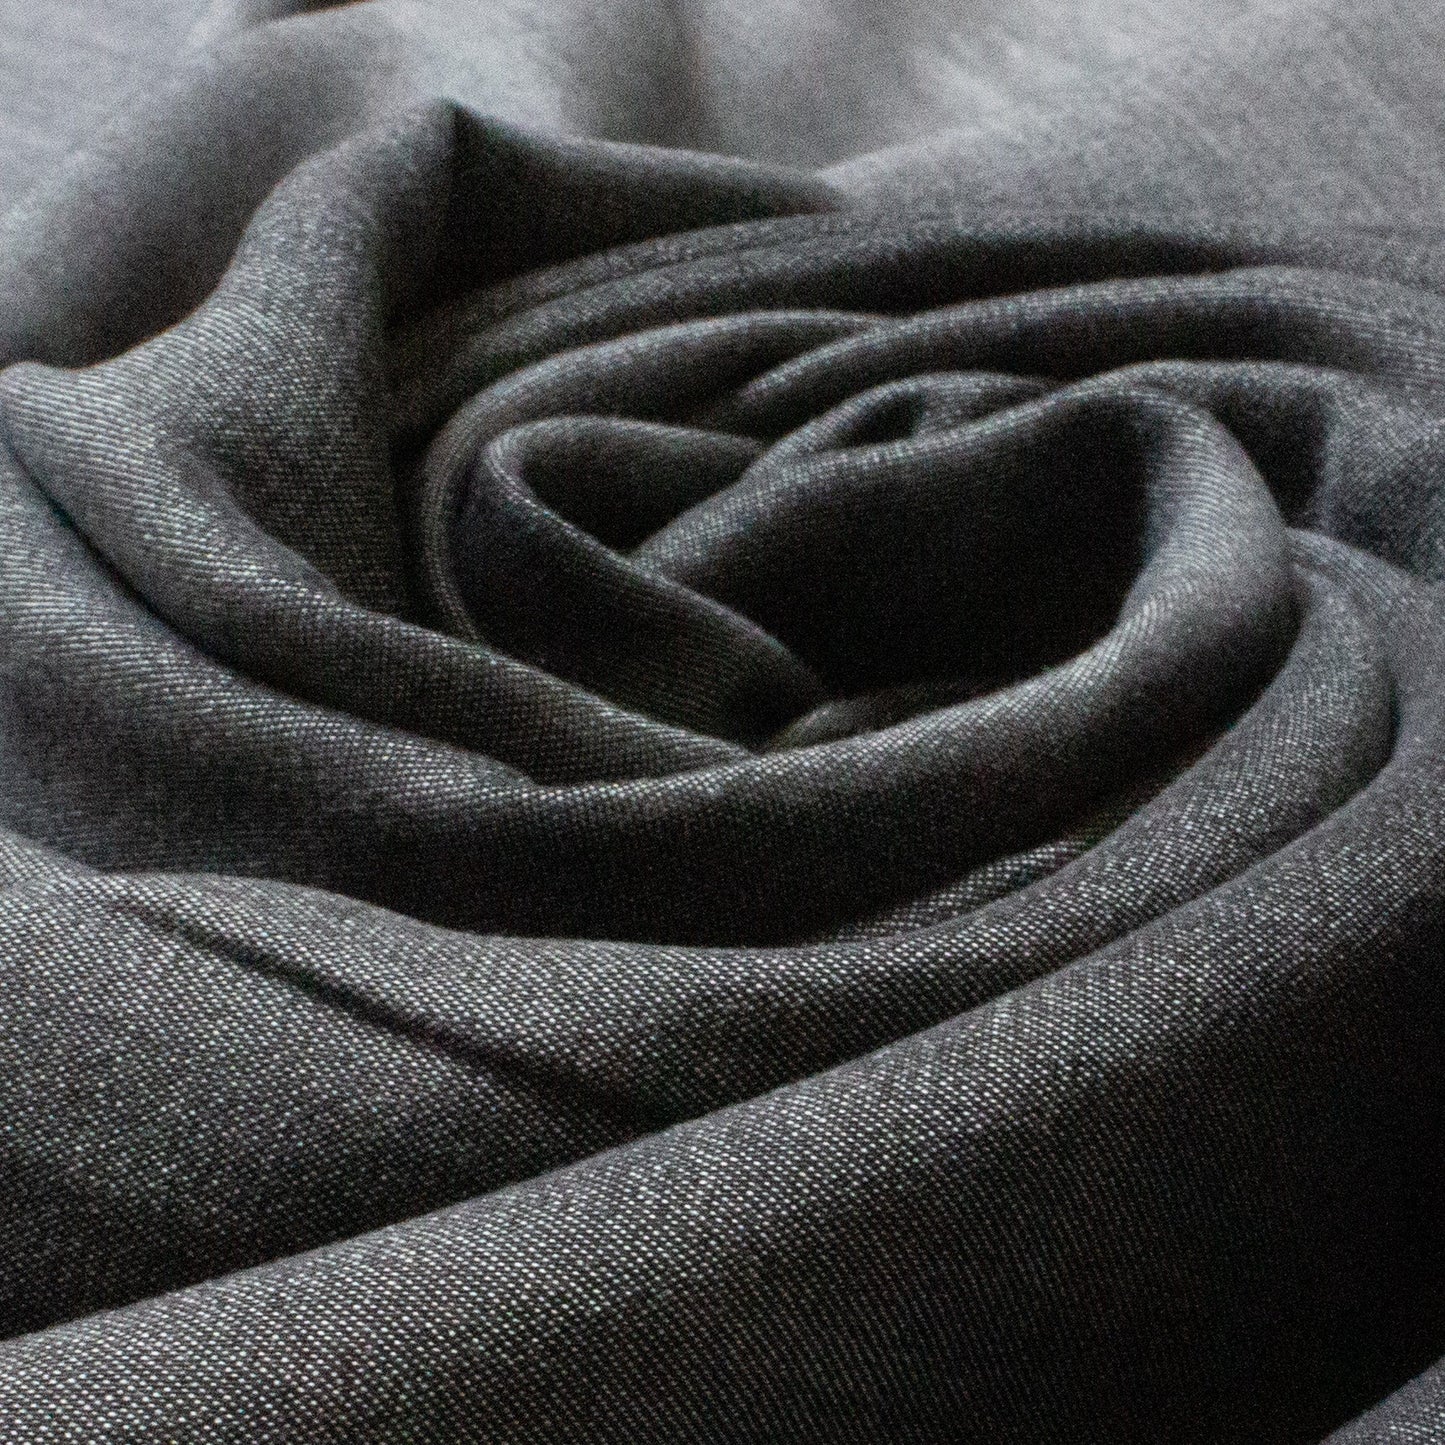 90cm Piece Tencel Chambray in Anthracite Grey